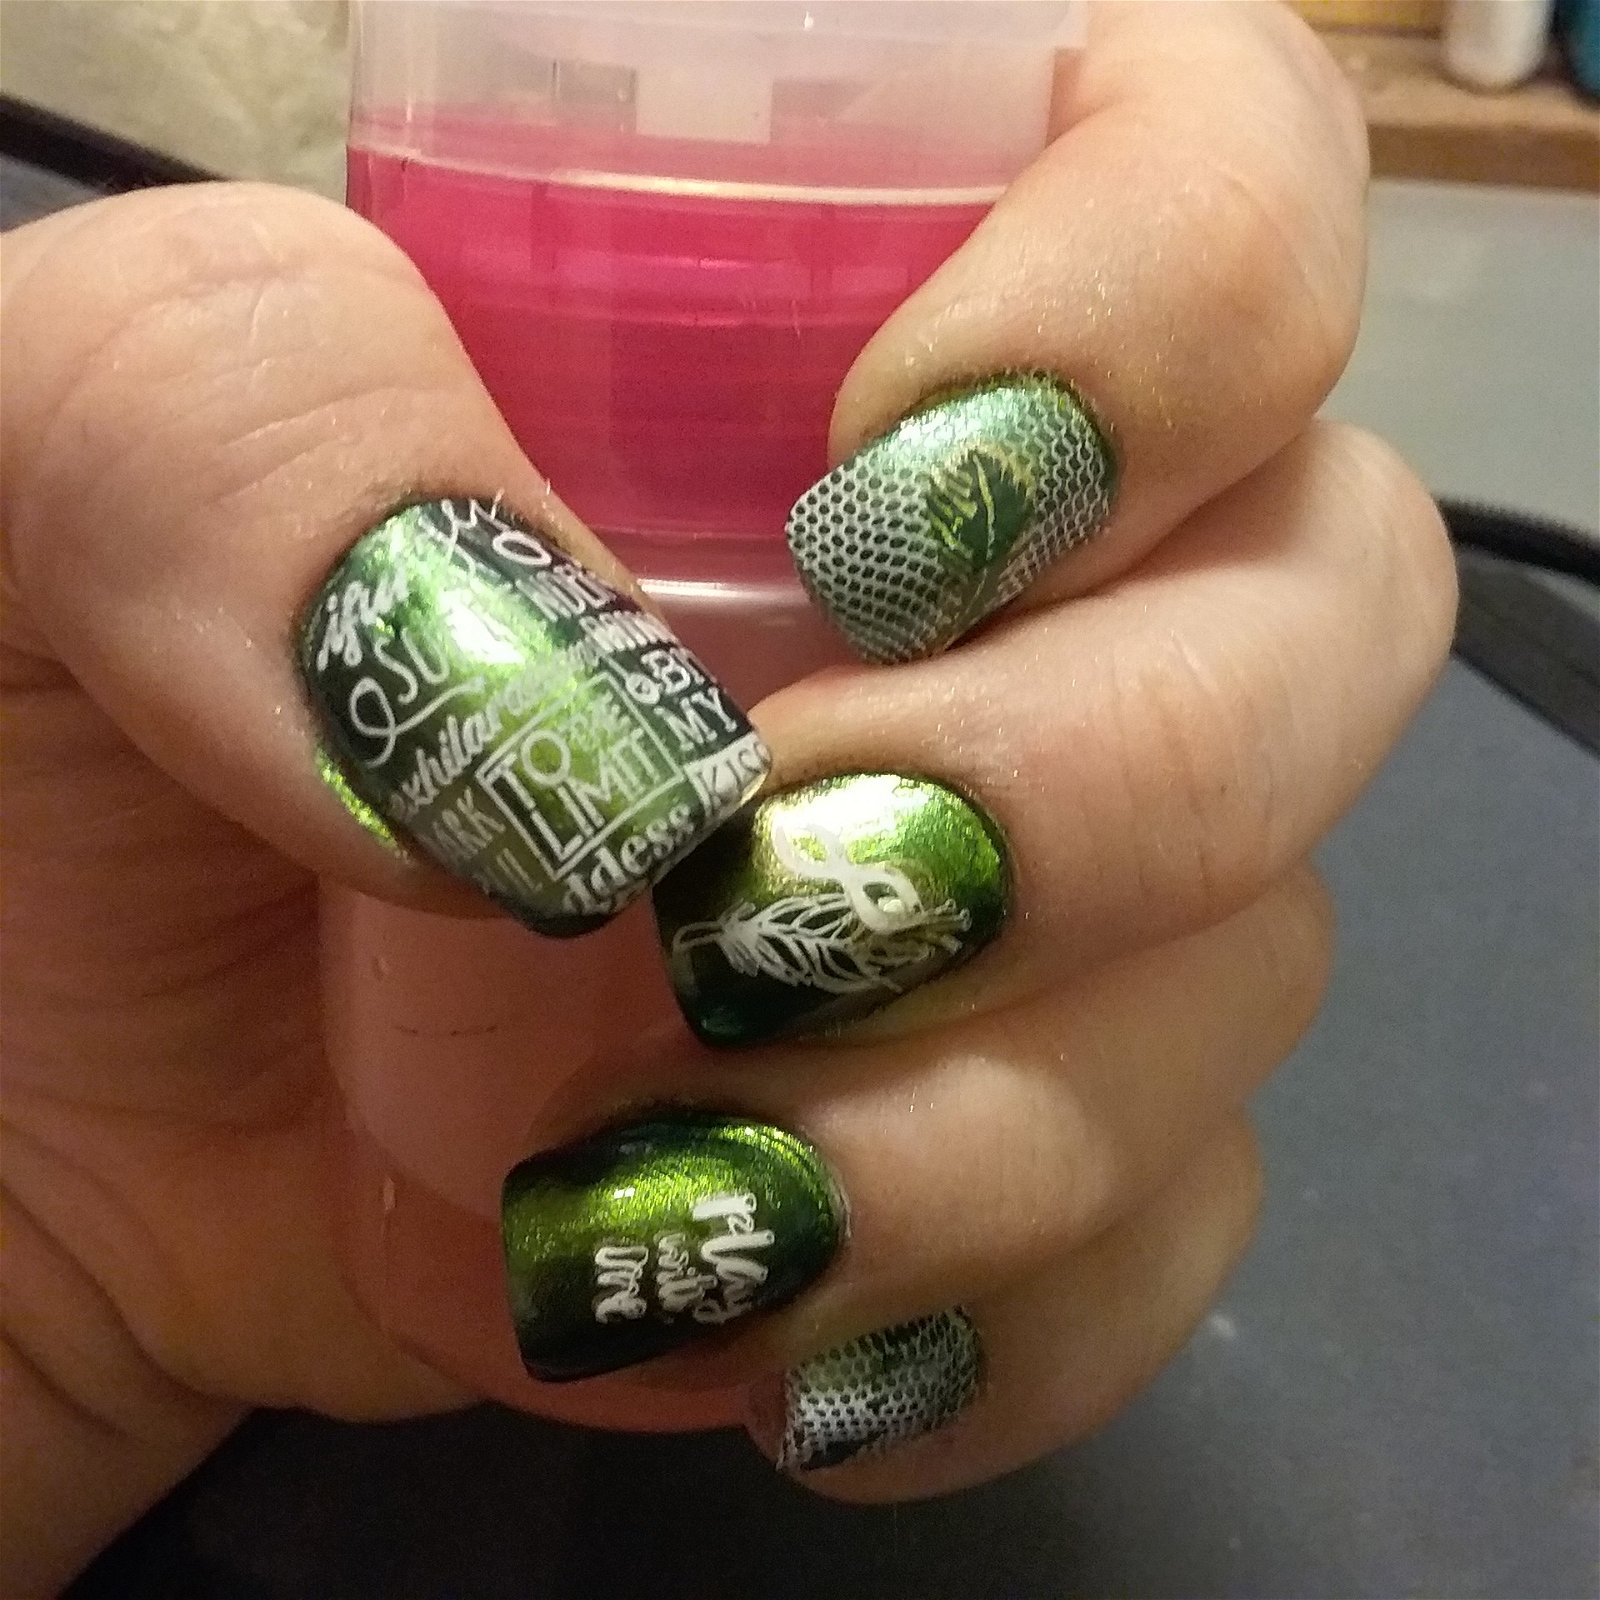 Photo by Touche0677 with the username @Touche0677,  July 17, 2020 at 2:01 AM. The post is about the topic Randoms and the text says 'Personally I think the '50 Shades...' books and movies were utter garbage. But i love this mani inspired by the Lifestyle'